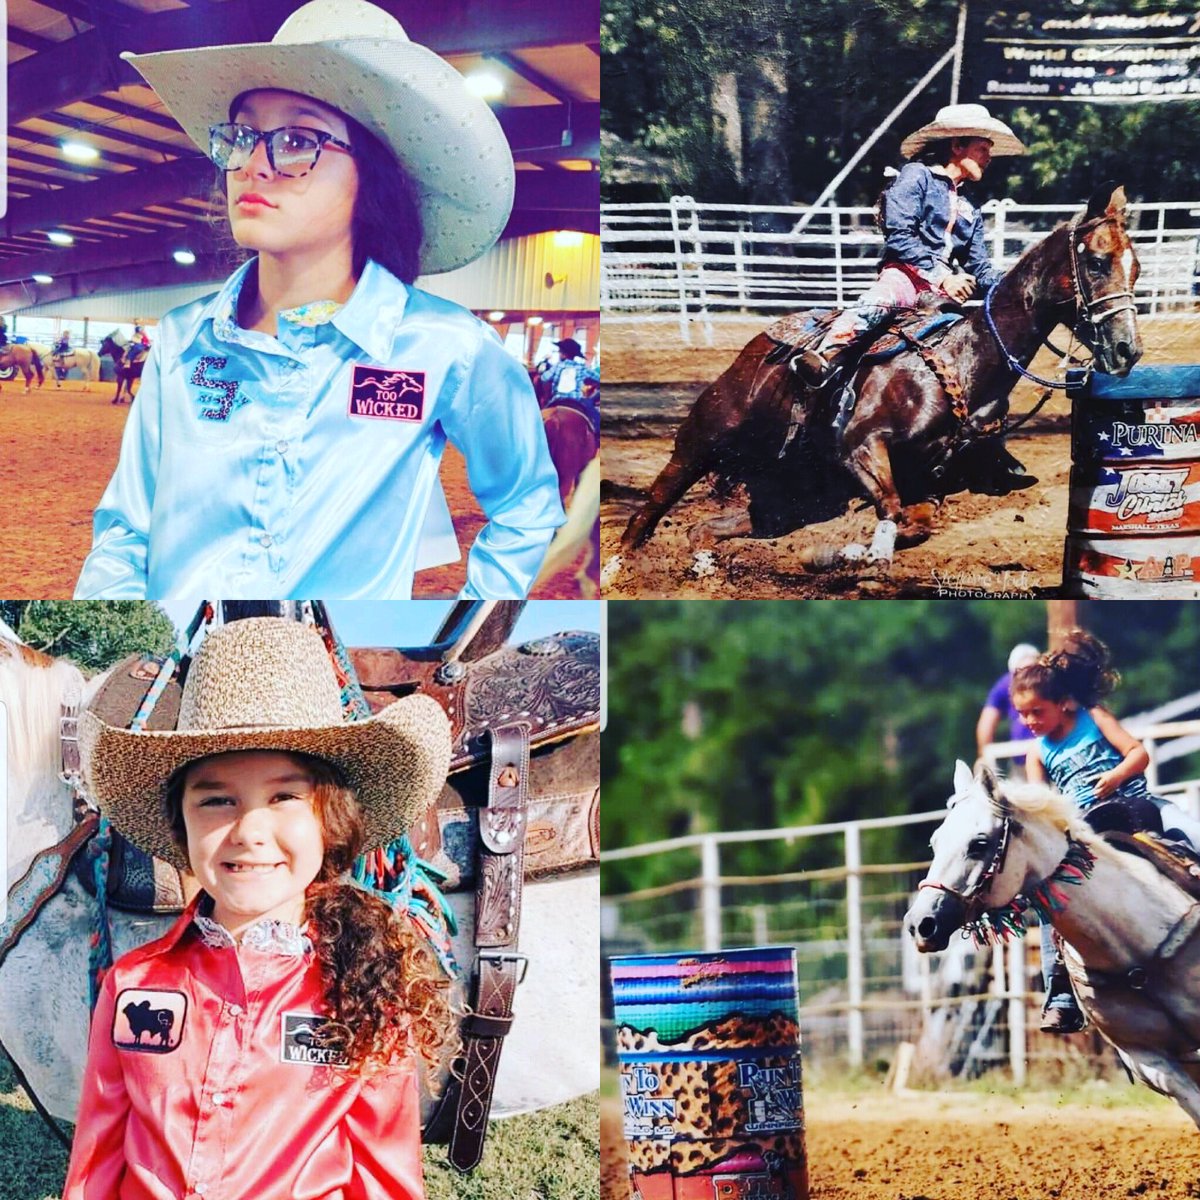 Wishing these two C3 cowgirls good luck in Decatur,Tx this weekend for little britches #Rodeo #BarrelRacer #RaiseThemRight #HappyNewYear2021